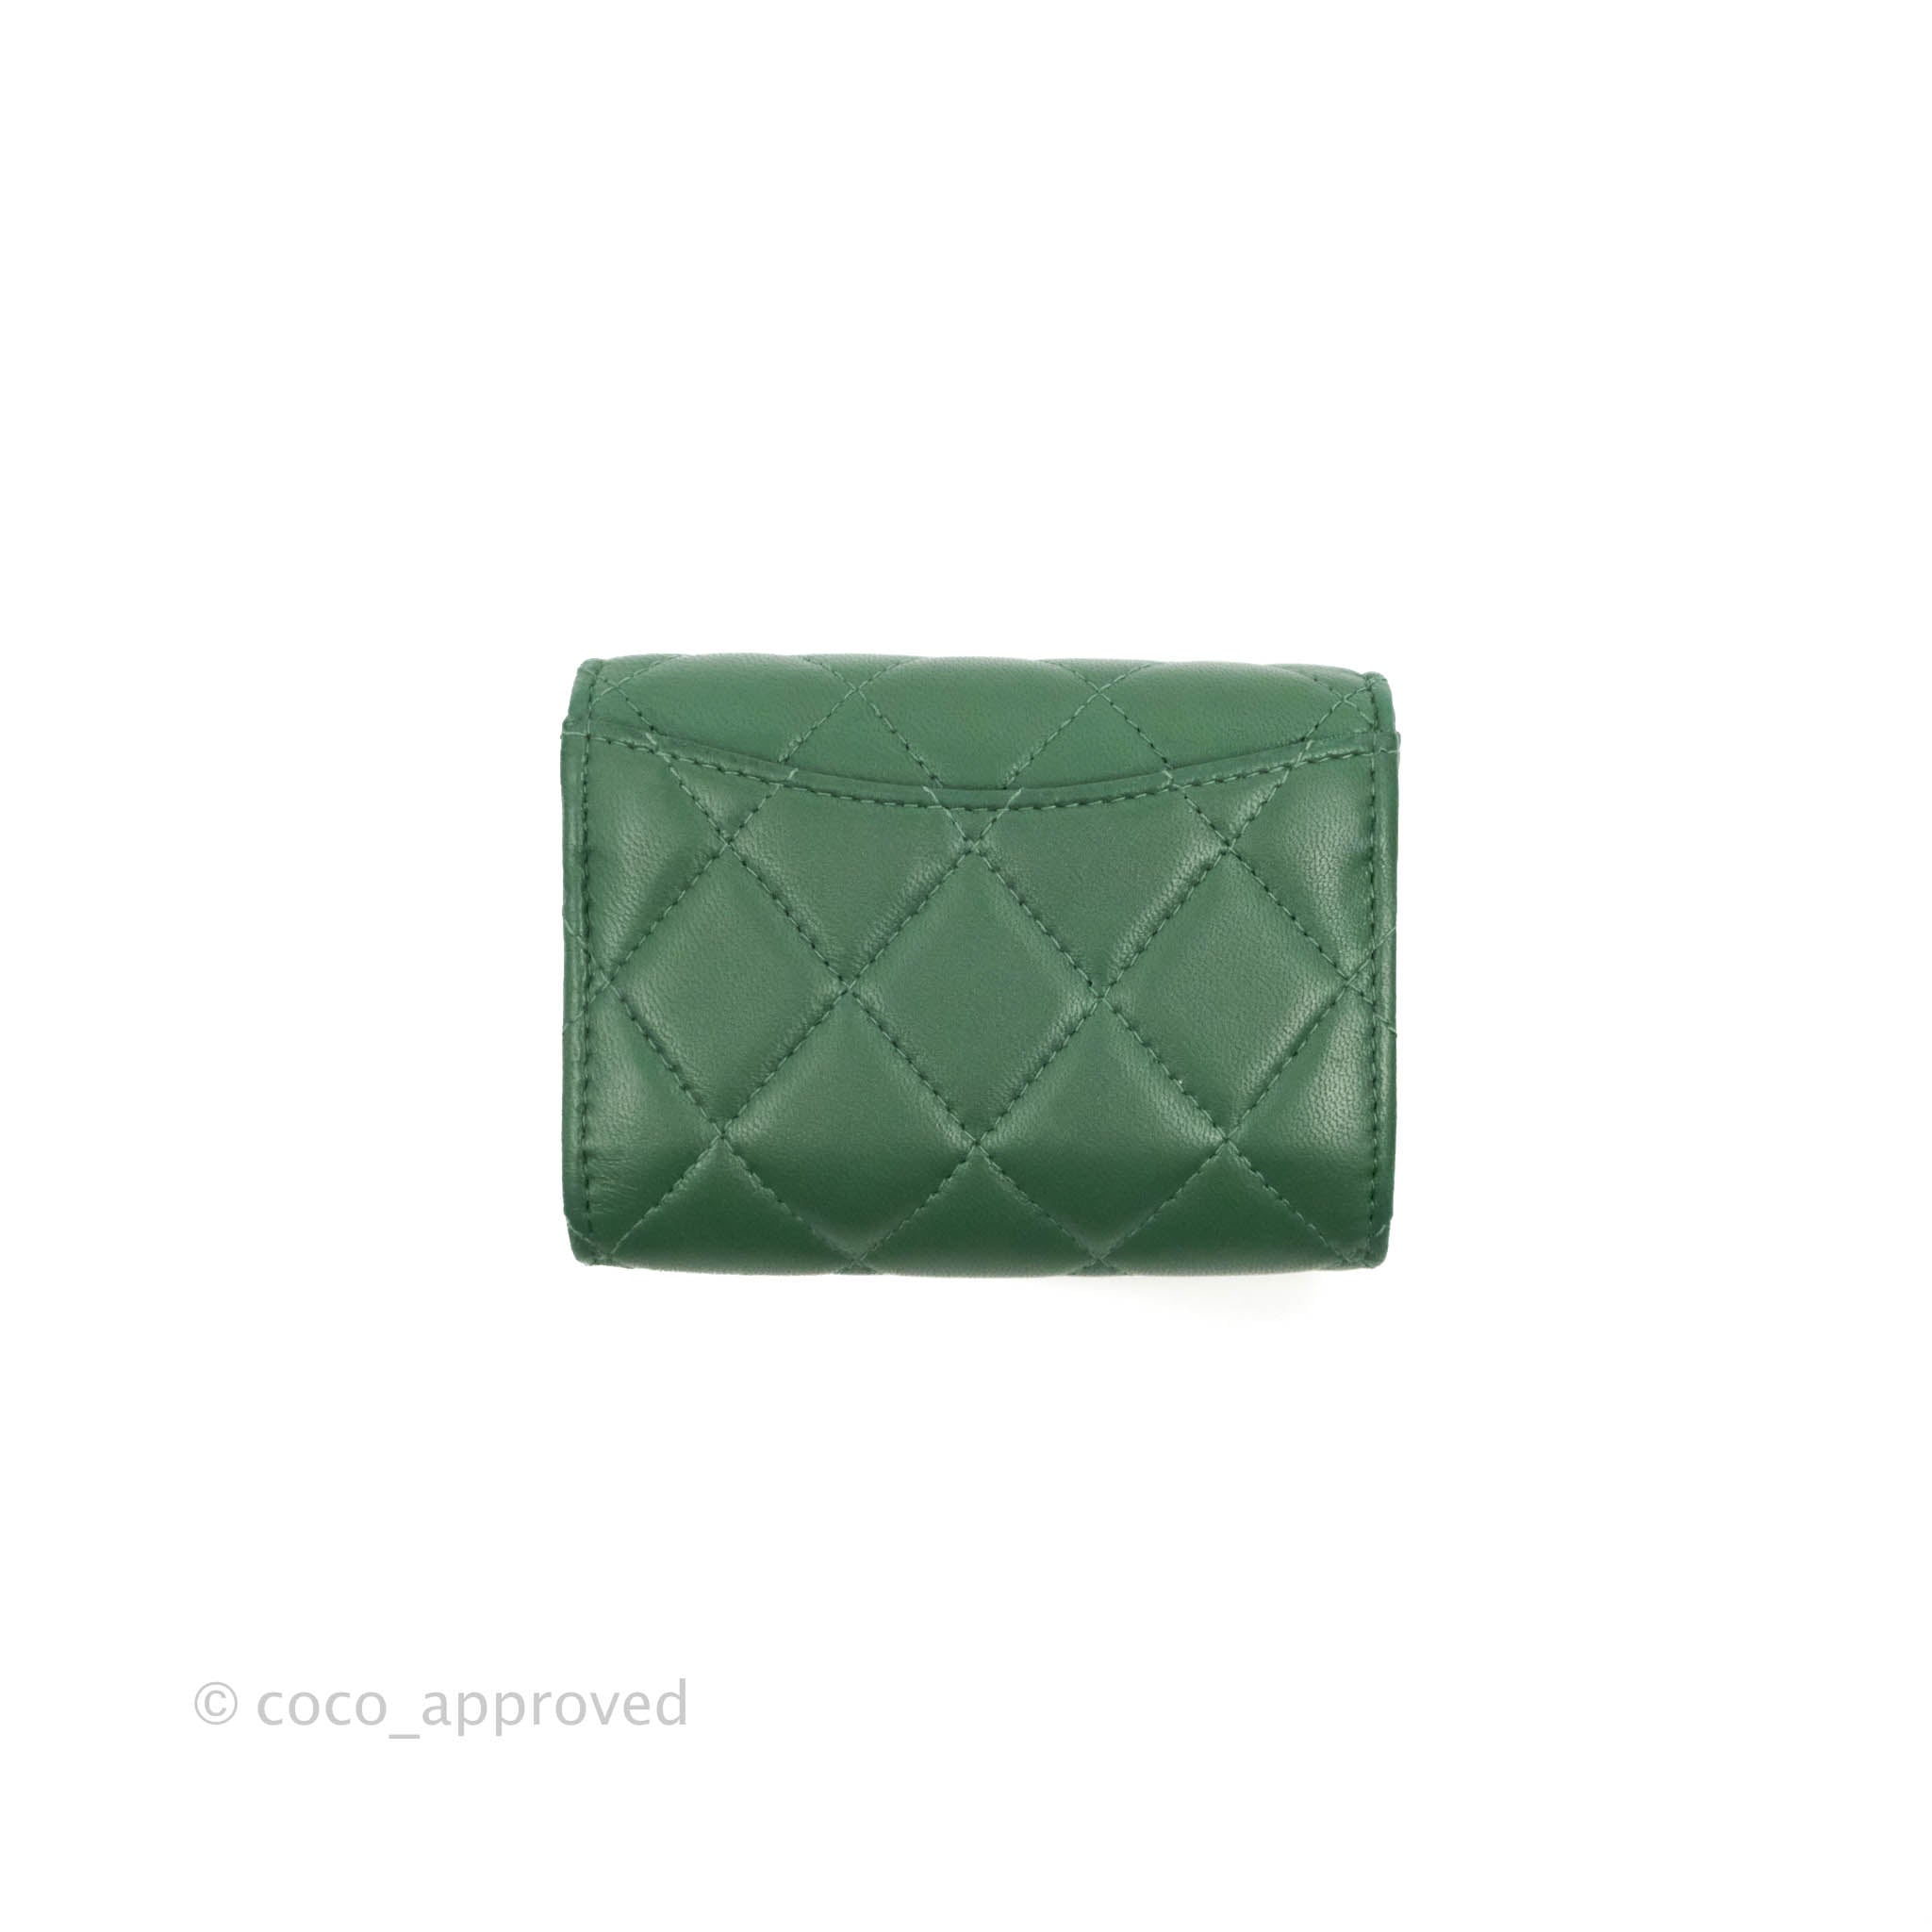 chanel teal purse